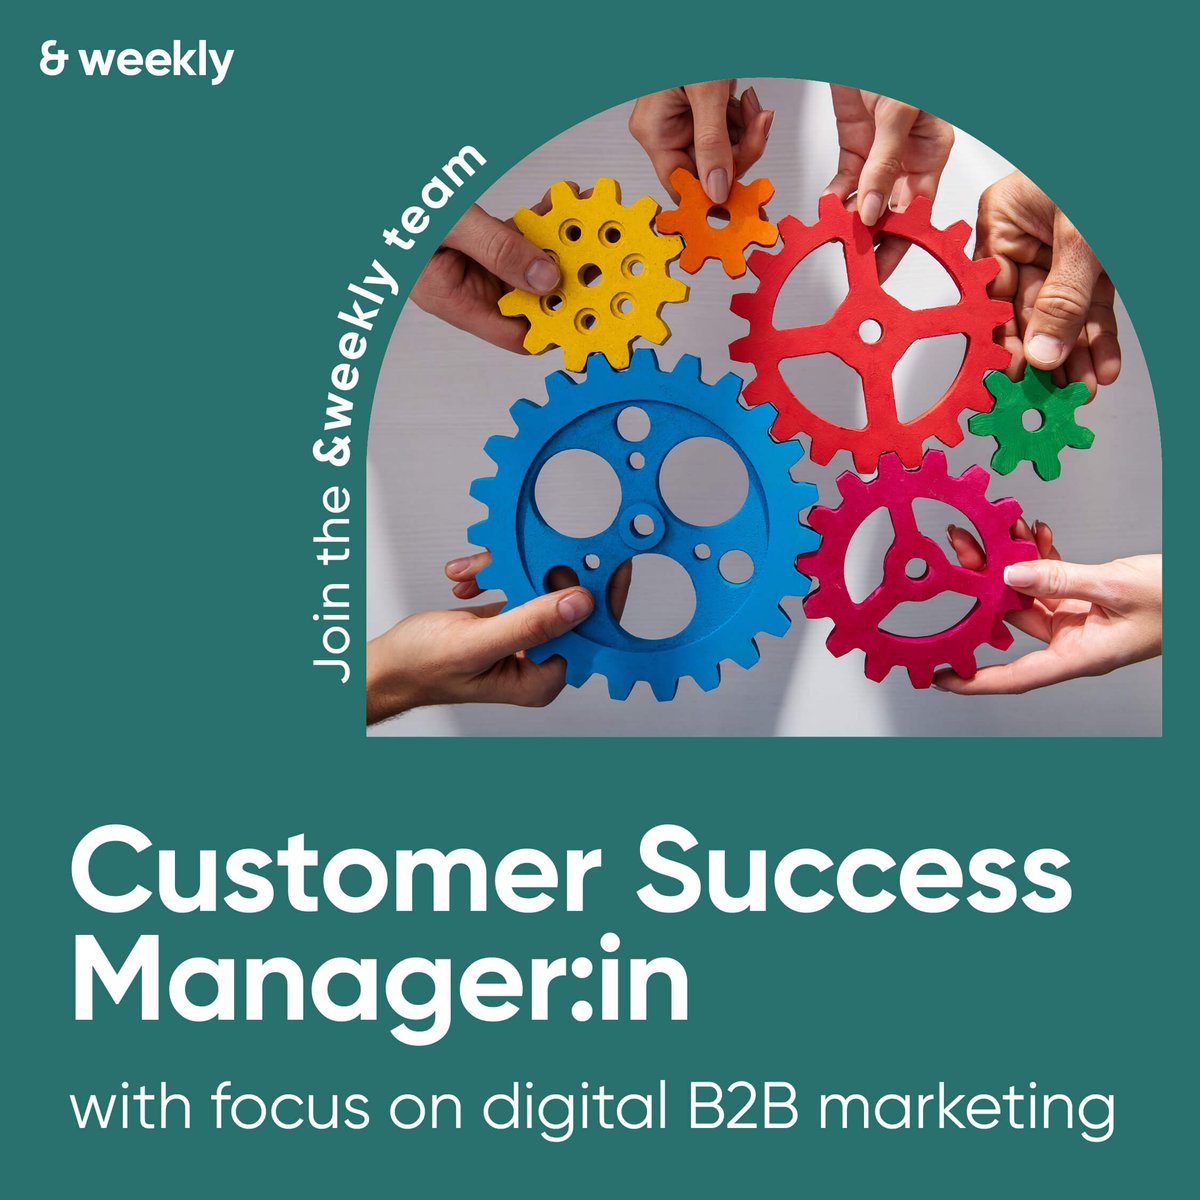 🚀 Customer Success Manager in B2B Marketing WANTED (Project Manager) 🚀&weekly is a growth agency for digital marketing & sales strategies. We work 100% as a virtual team. 👉 bit.ly/3MWl6y8 #customerengagement #marketingjob #digitalmarketingjobs